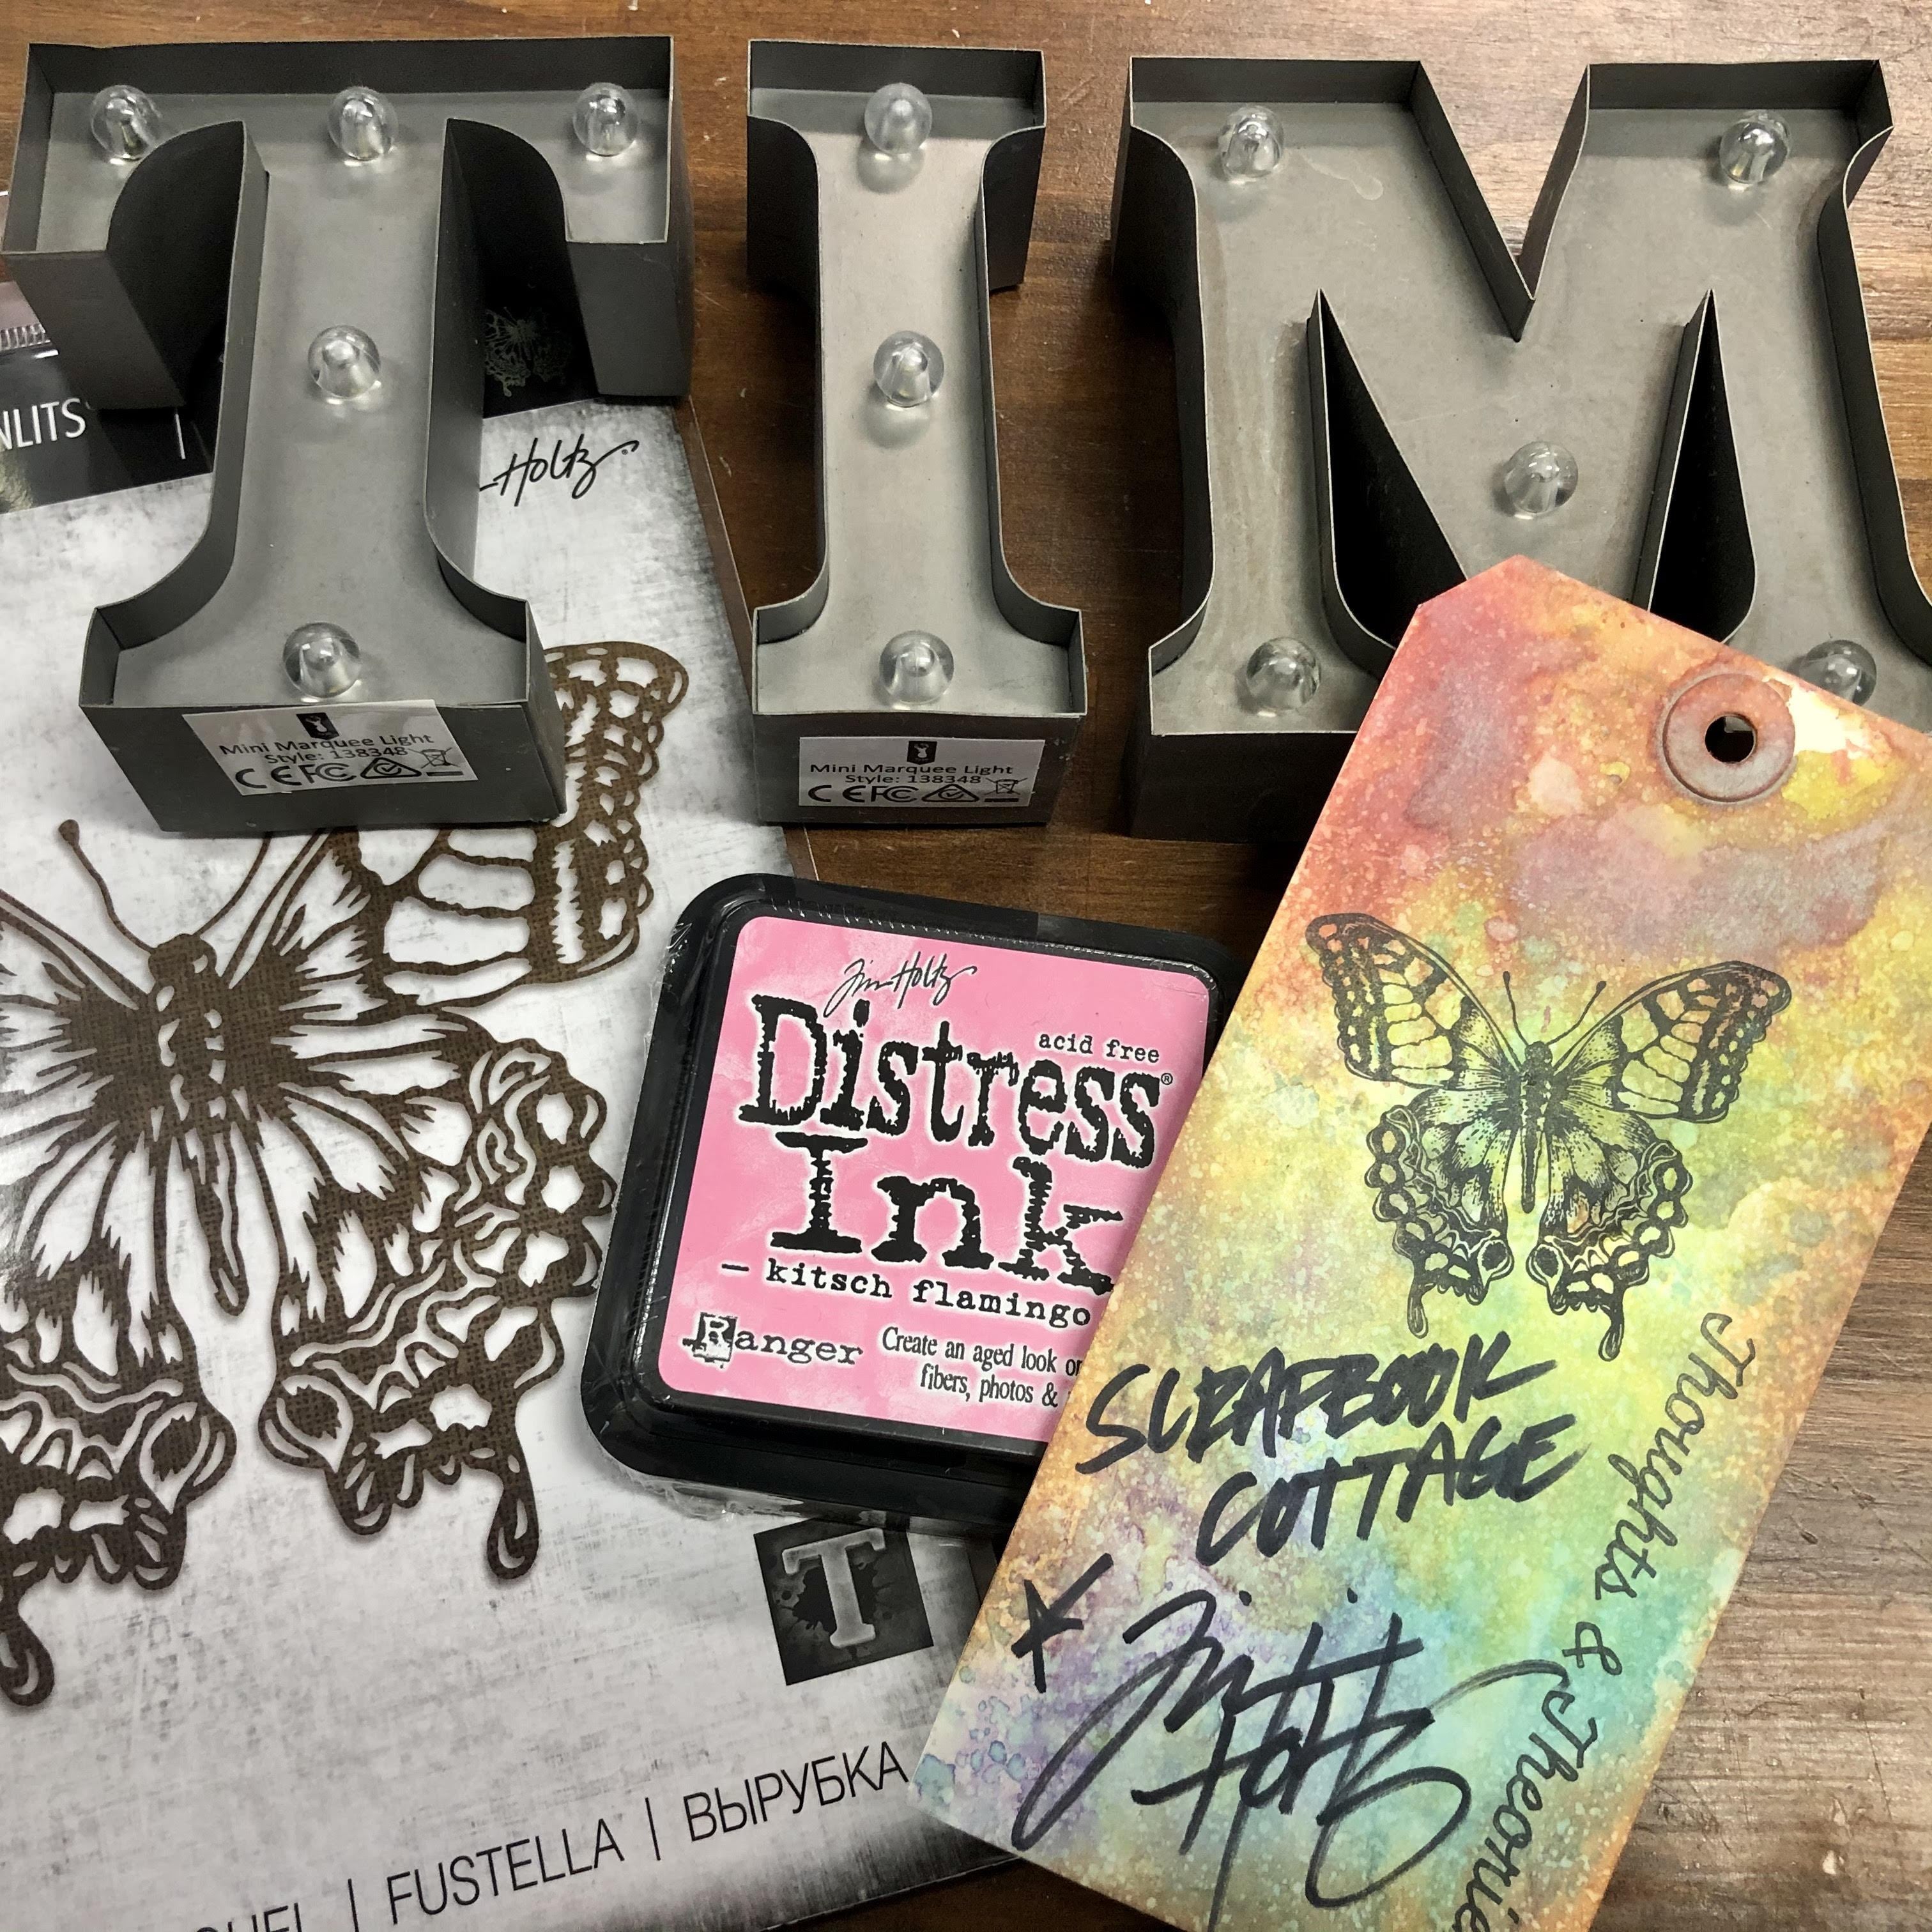 Tim Holtz - Scorched Timber - Distress Oxide Ink Pad